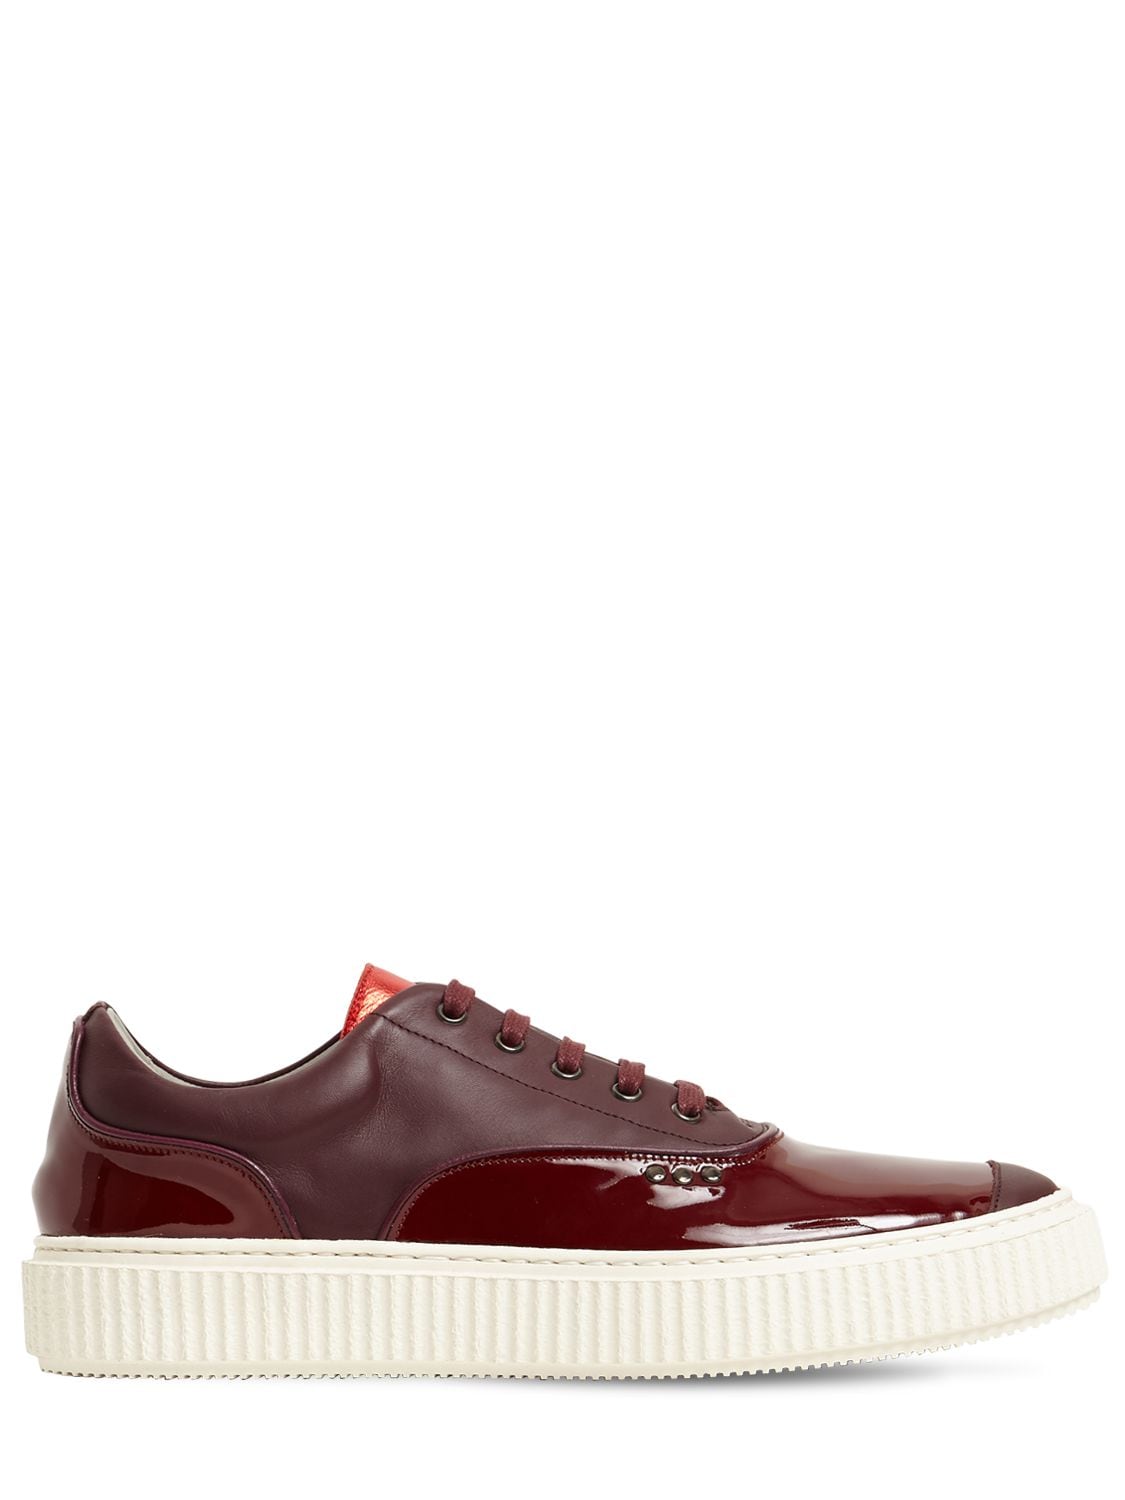 Me.land Low Top Patent & Matte Leather Sneakers In Bordeaux